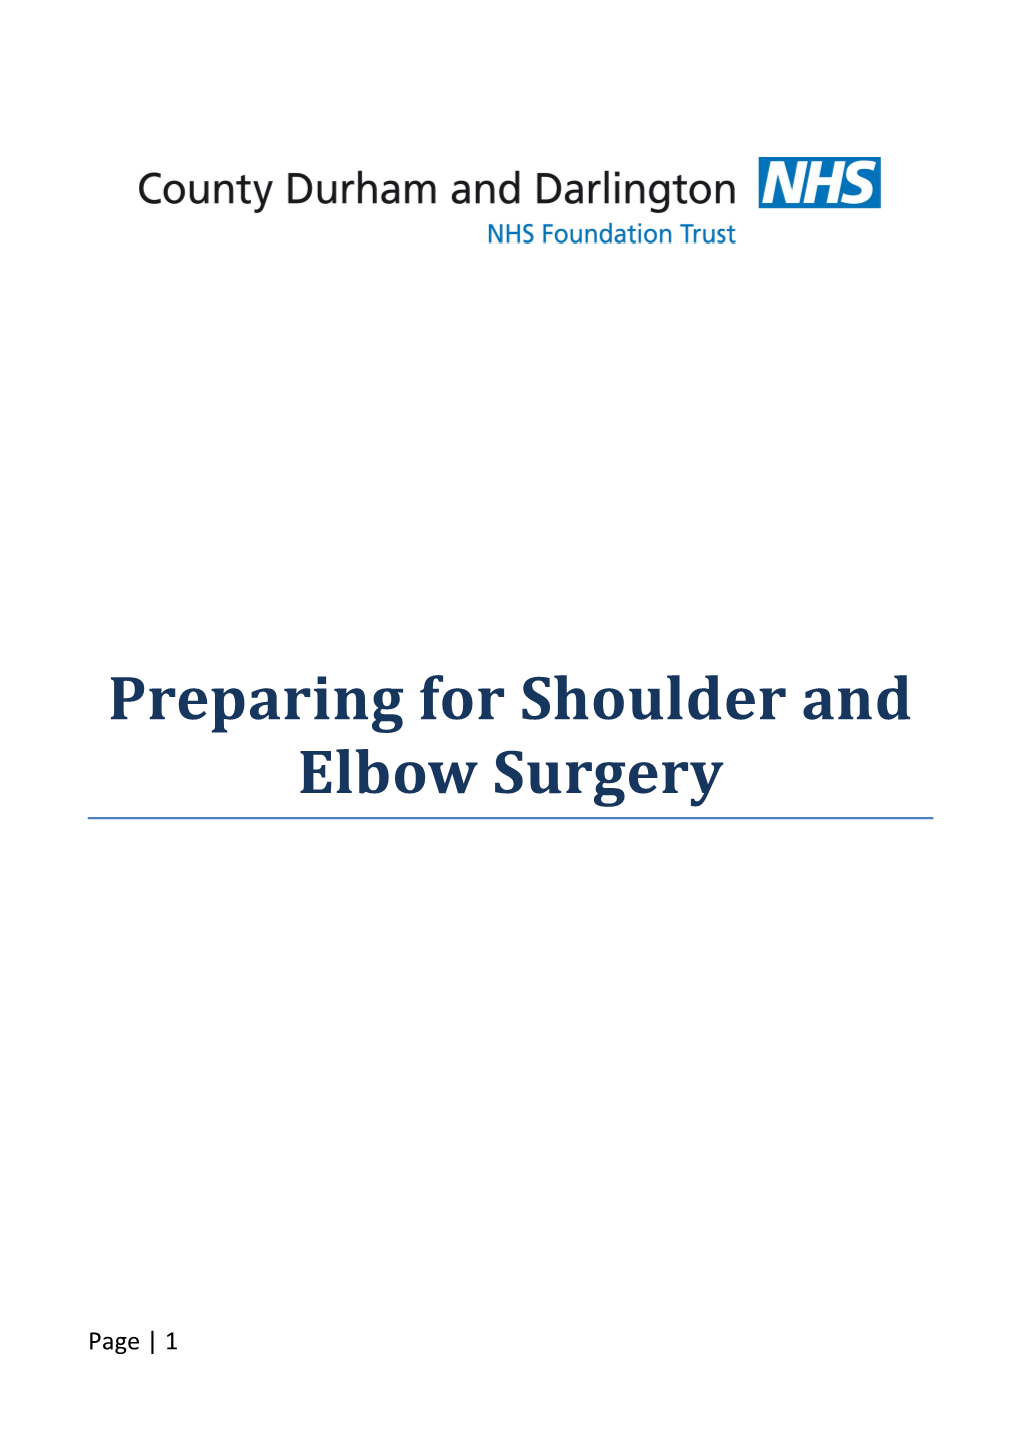 Preparing for Shoulder and Elbow Surgery